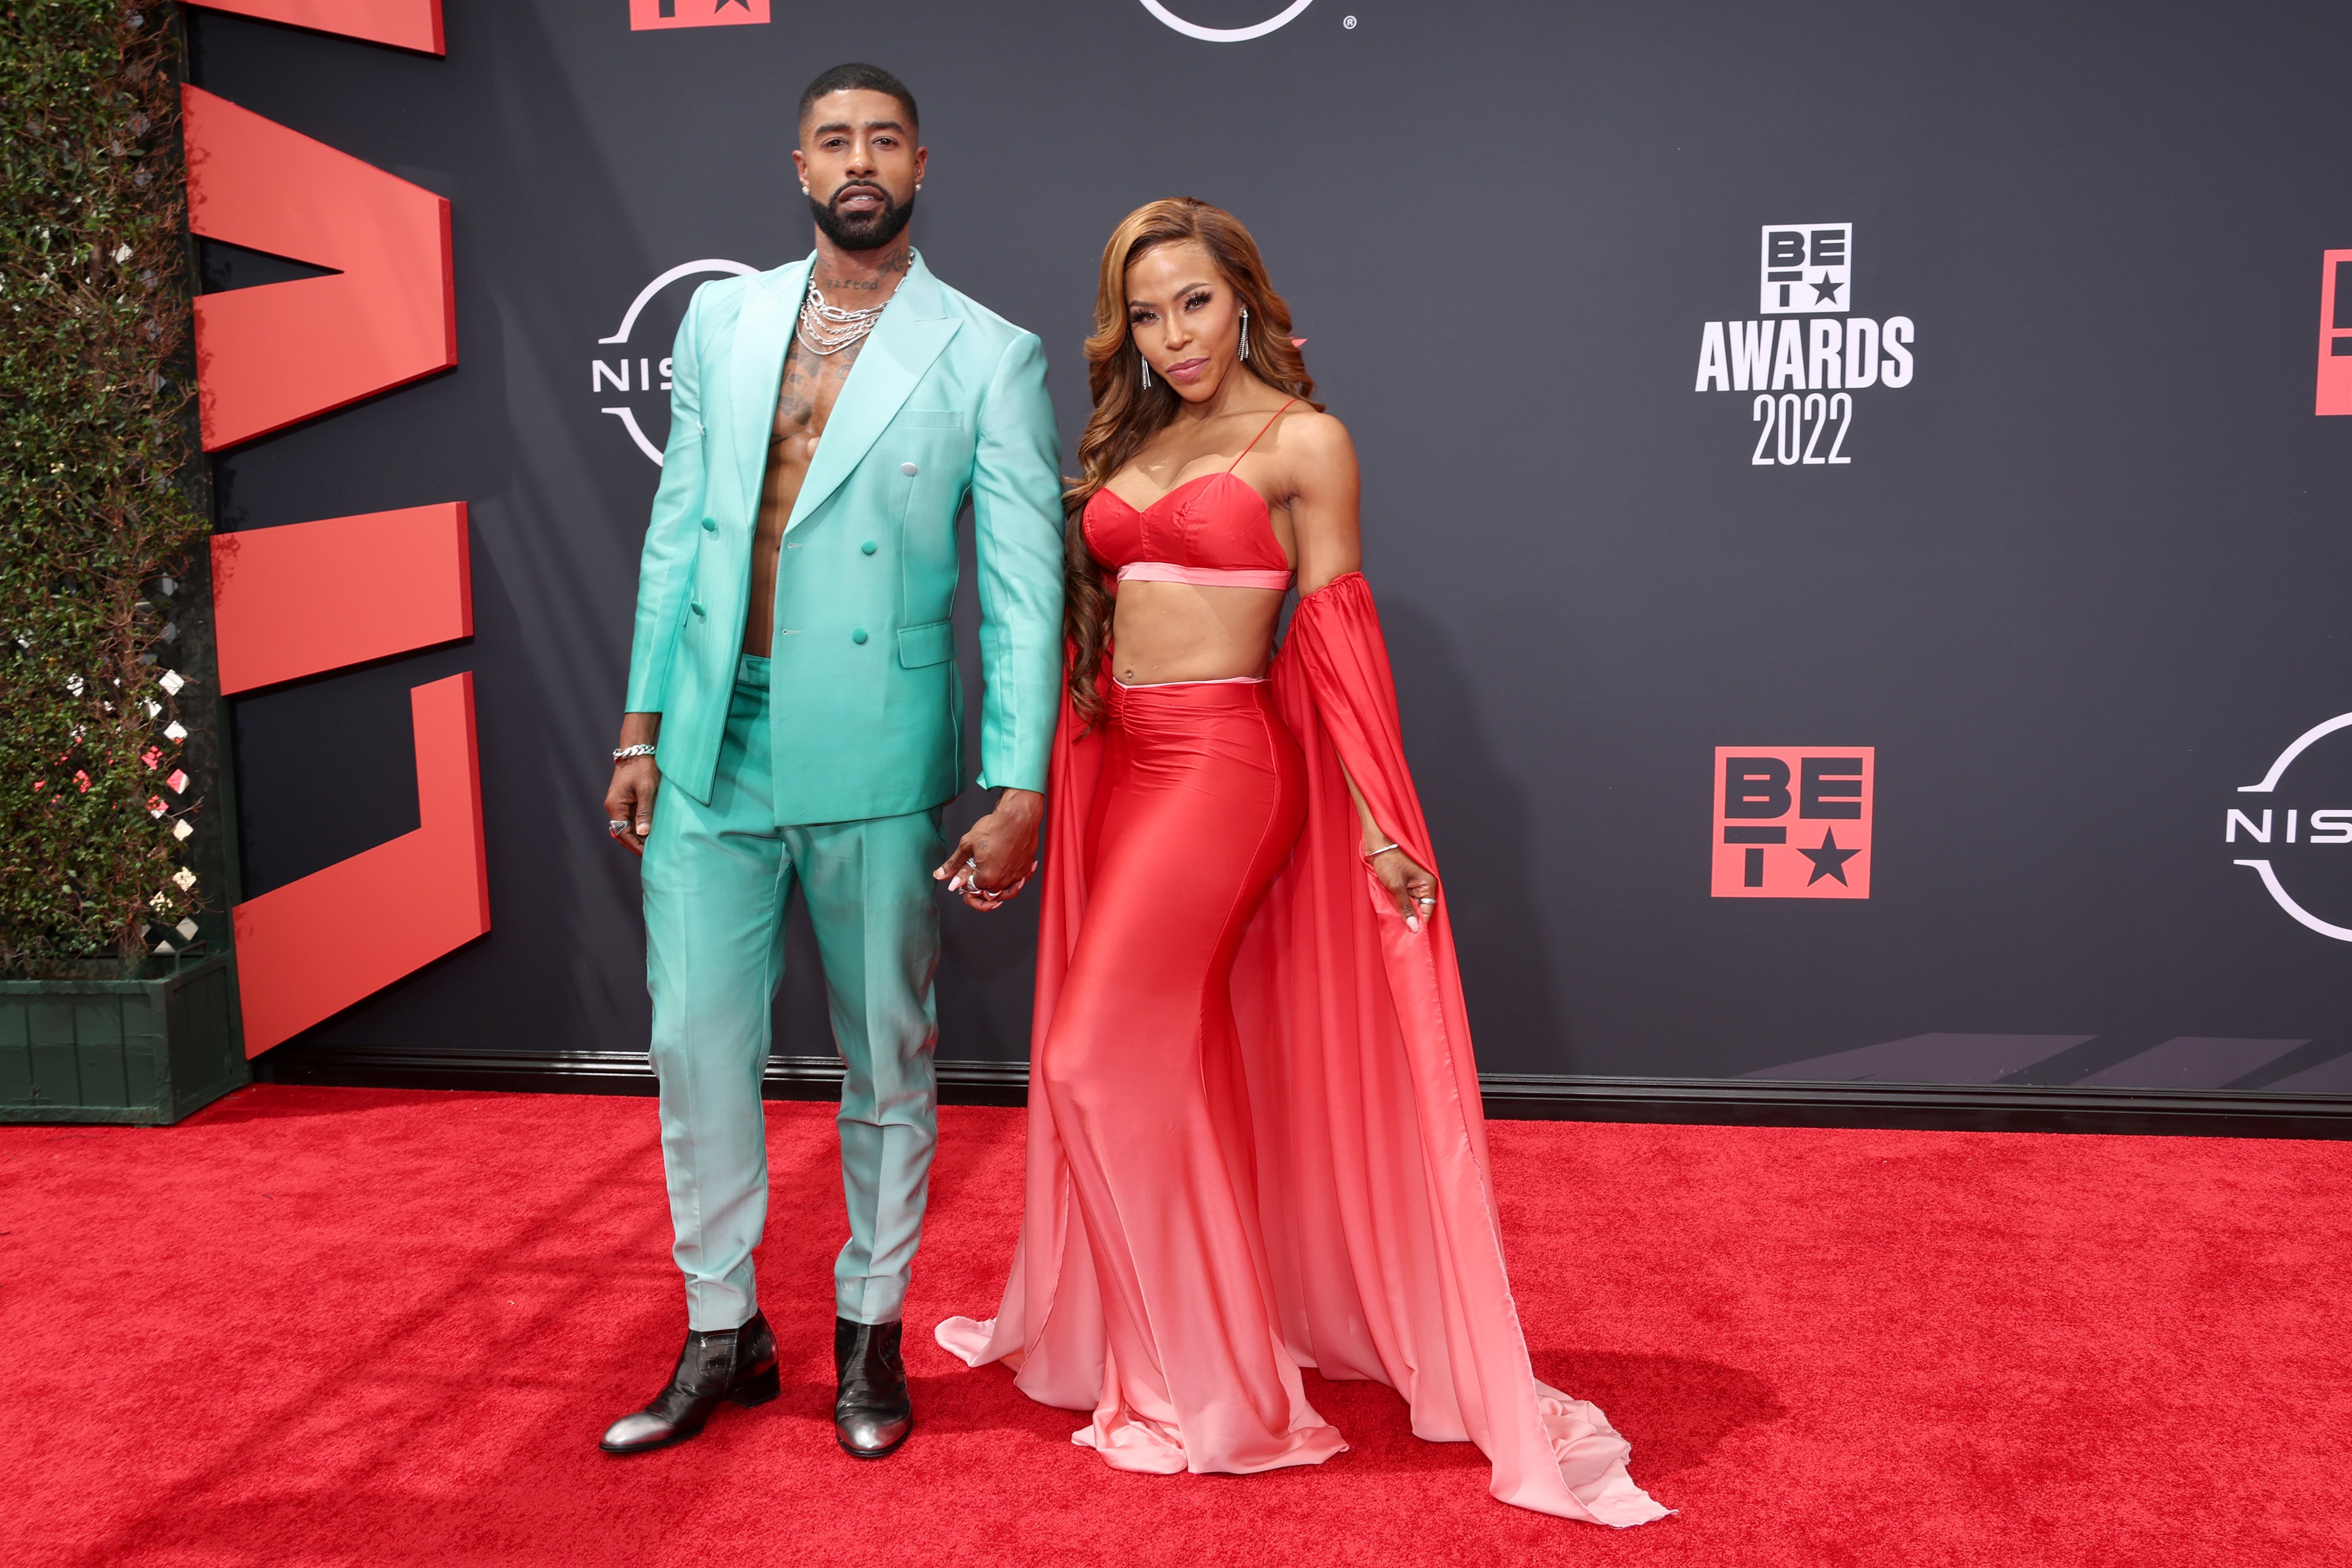 (L-R) Skyh Alvester Black and KJ Smith attend the 2022 BET Awards at Microsoft Theater on June 26, 2022 in Los Angeles, California. | Source: Getty Images